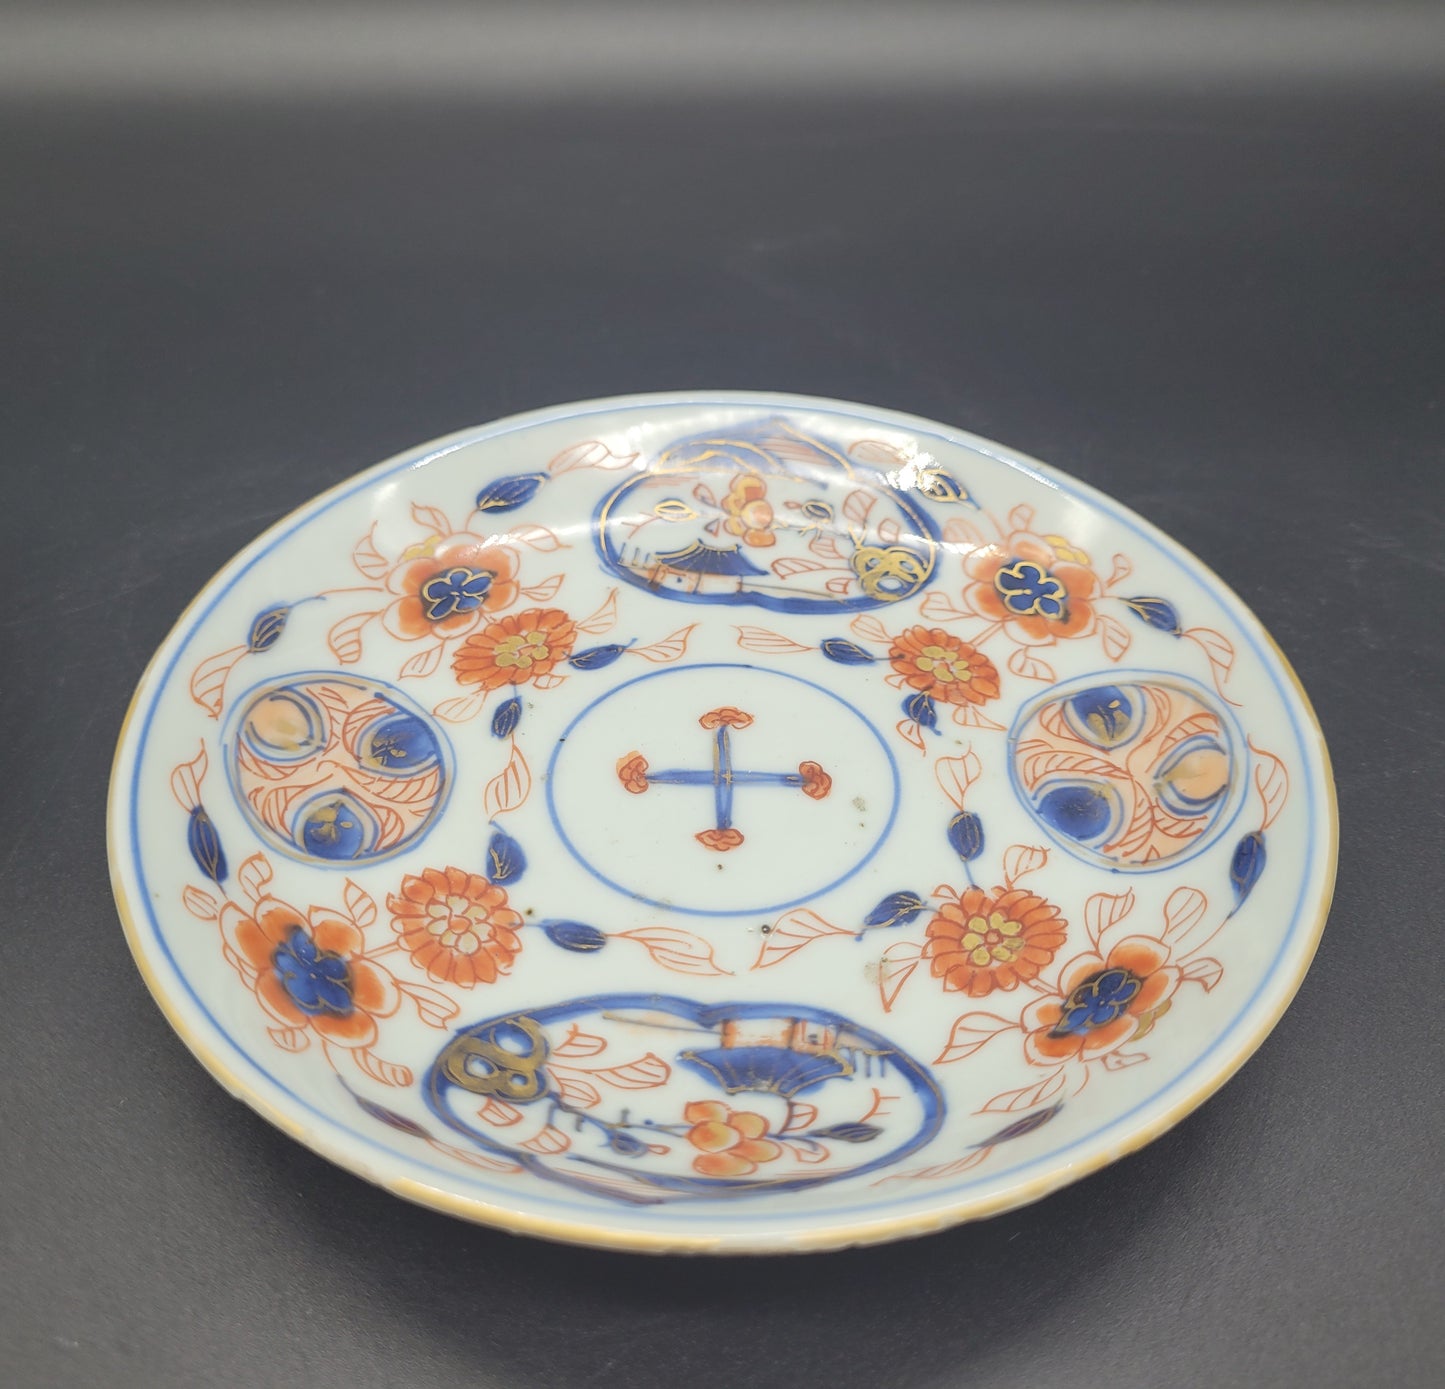 Chinese Antique Tea Bowls and Saucer Plate 18 / 19th Century Imari